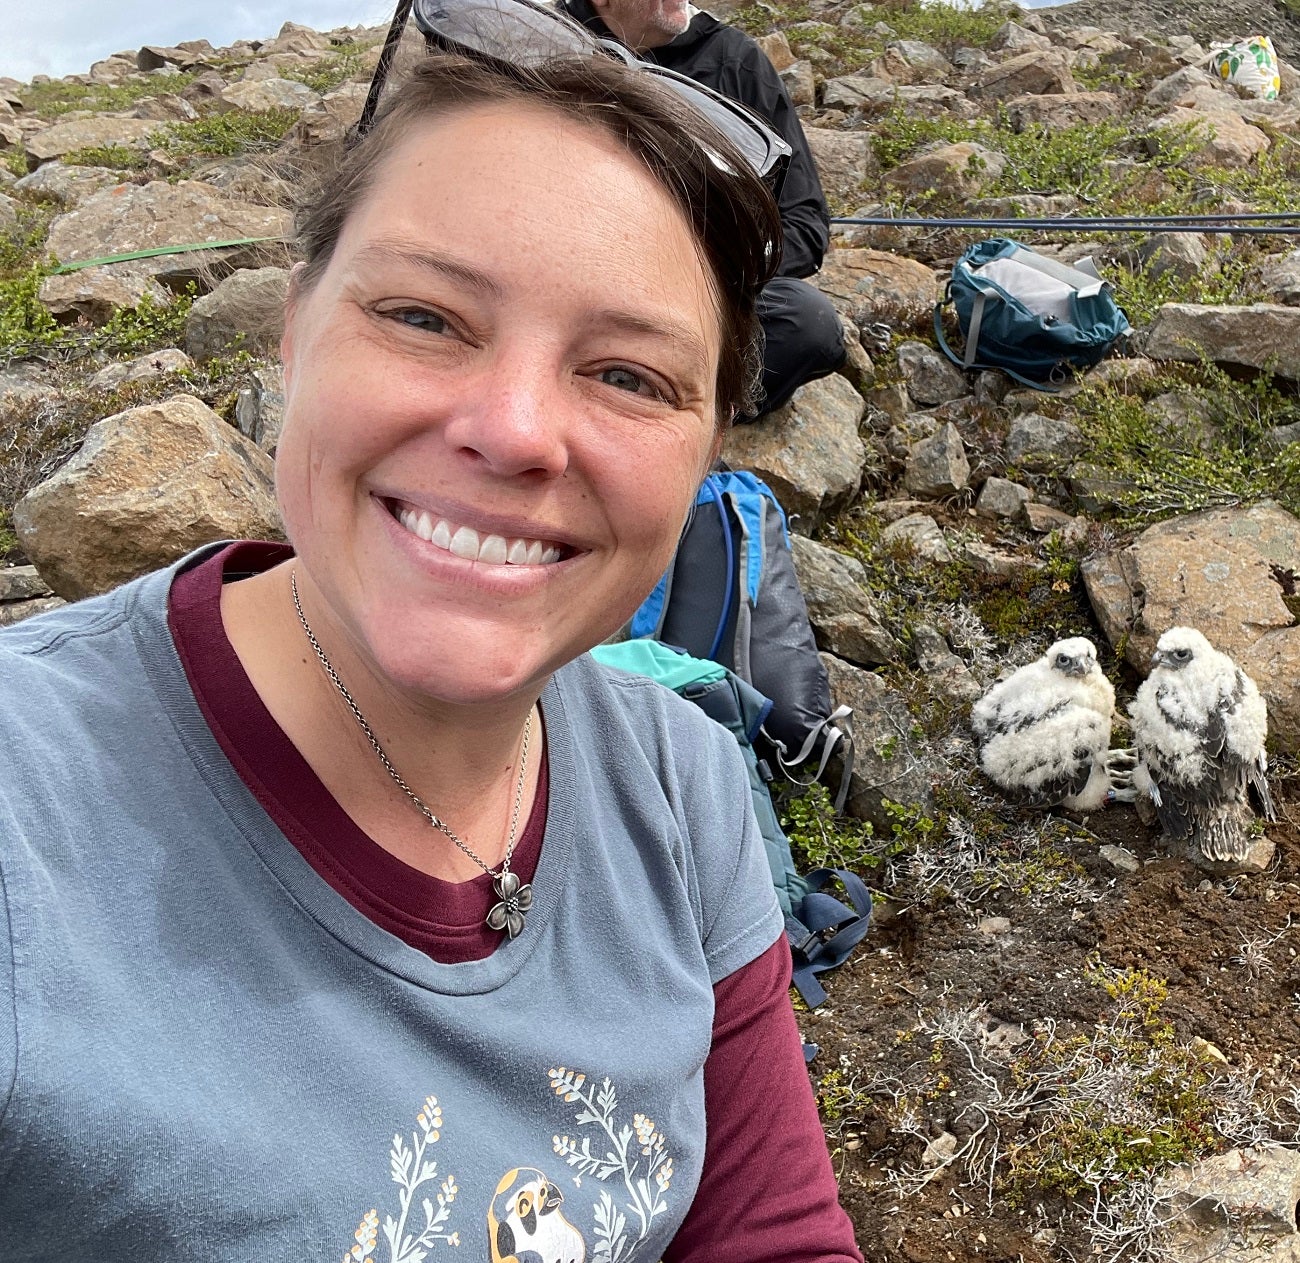 Stephanie Galla with Gyrfalcon nestlings on a rocky slope